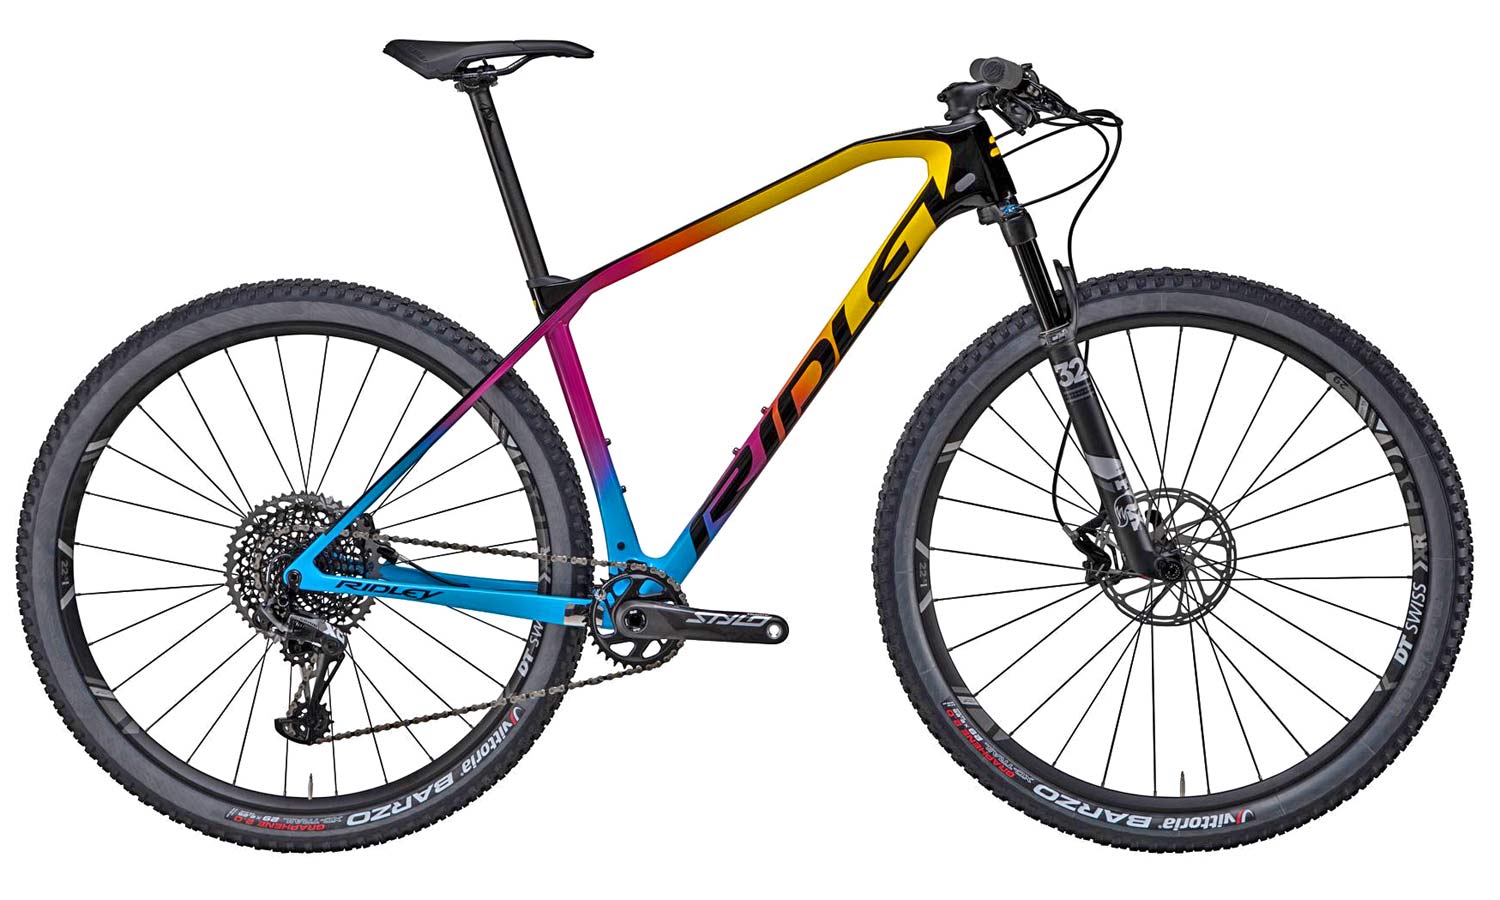 Ridley Ignite SLX carbon XC race hardtail, limited edition Special Designs lightweight carbon cross-country mountain bike